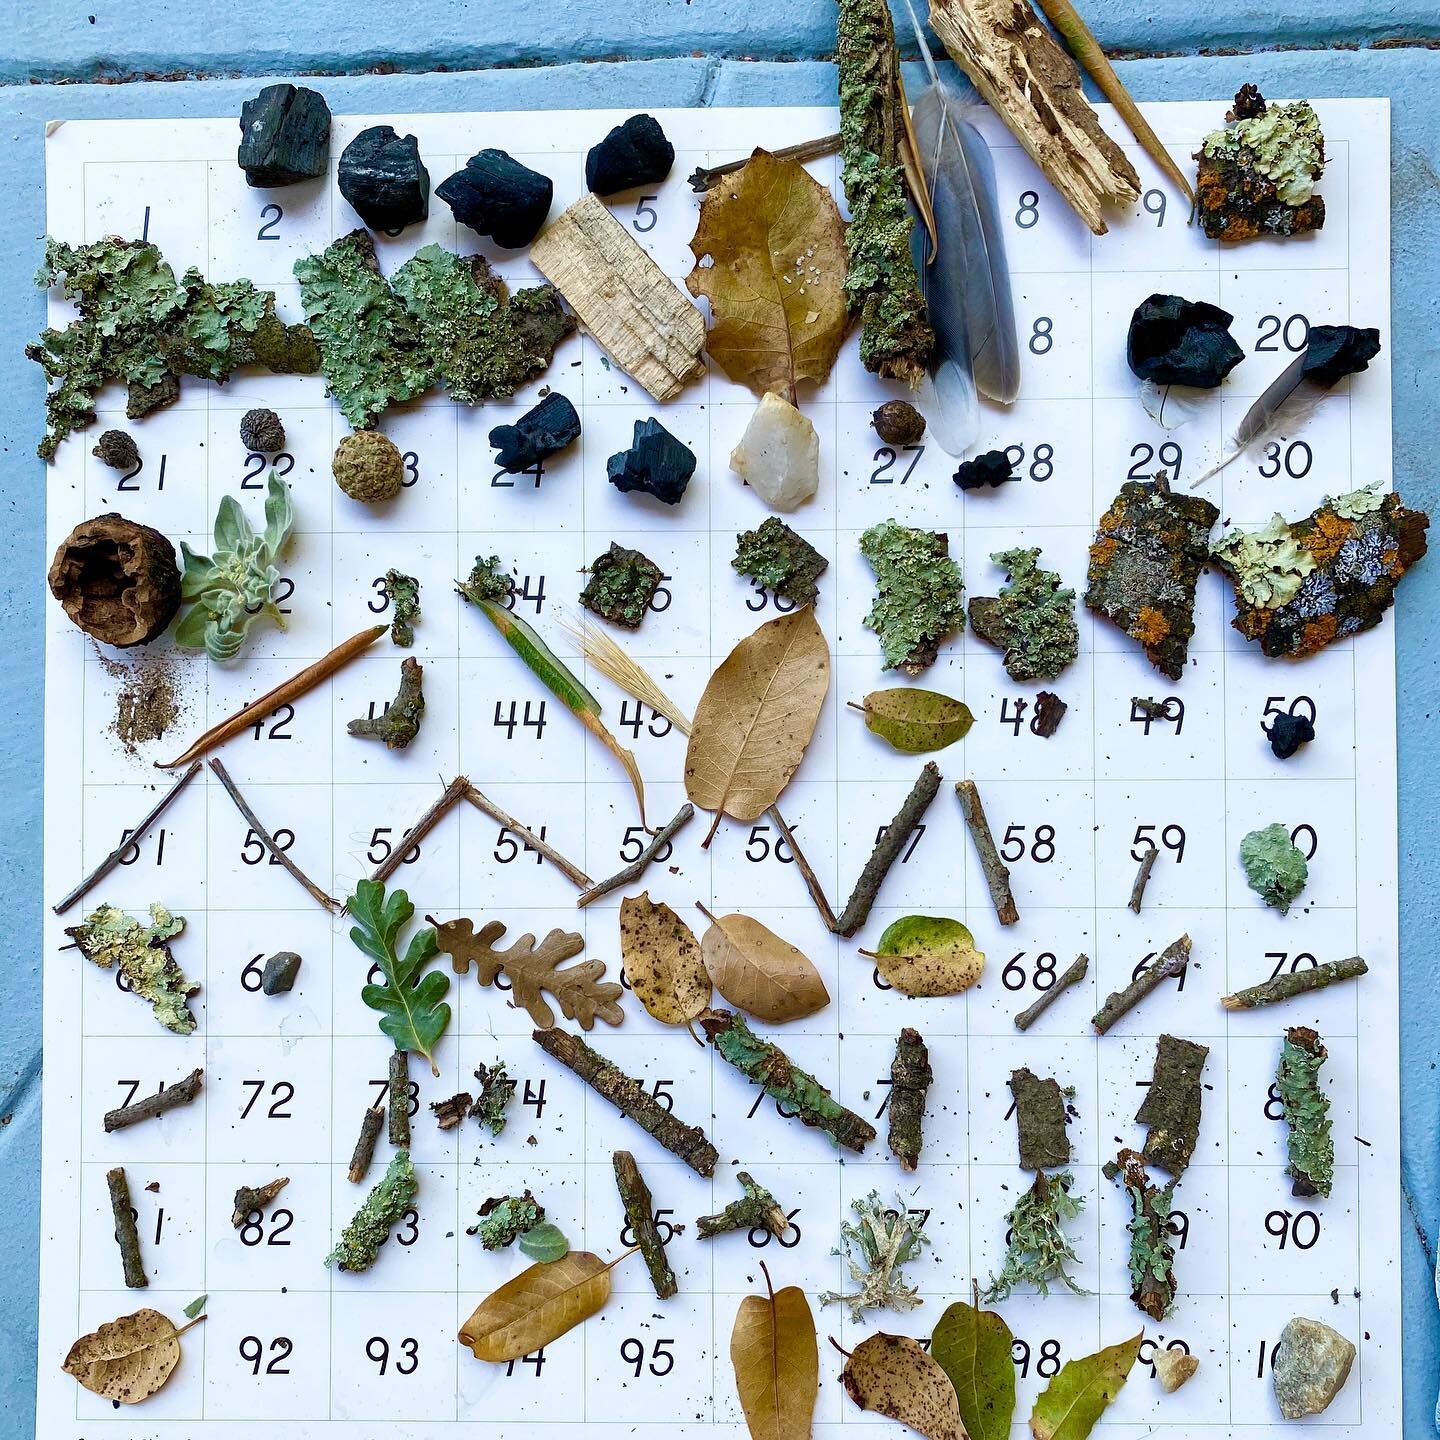 One Hundred Nature Treasures! The Montessori 100 Numbers Board and control chart can be filled with natural loose parts found on a nature walk. 
🍃
This is an engaging, outdoor activity to do with children still fascinated by counting to 100, collect